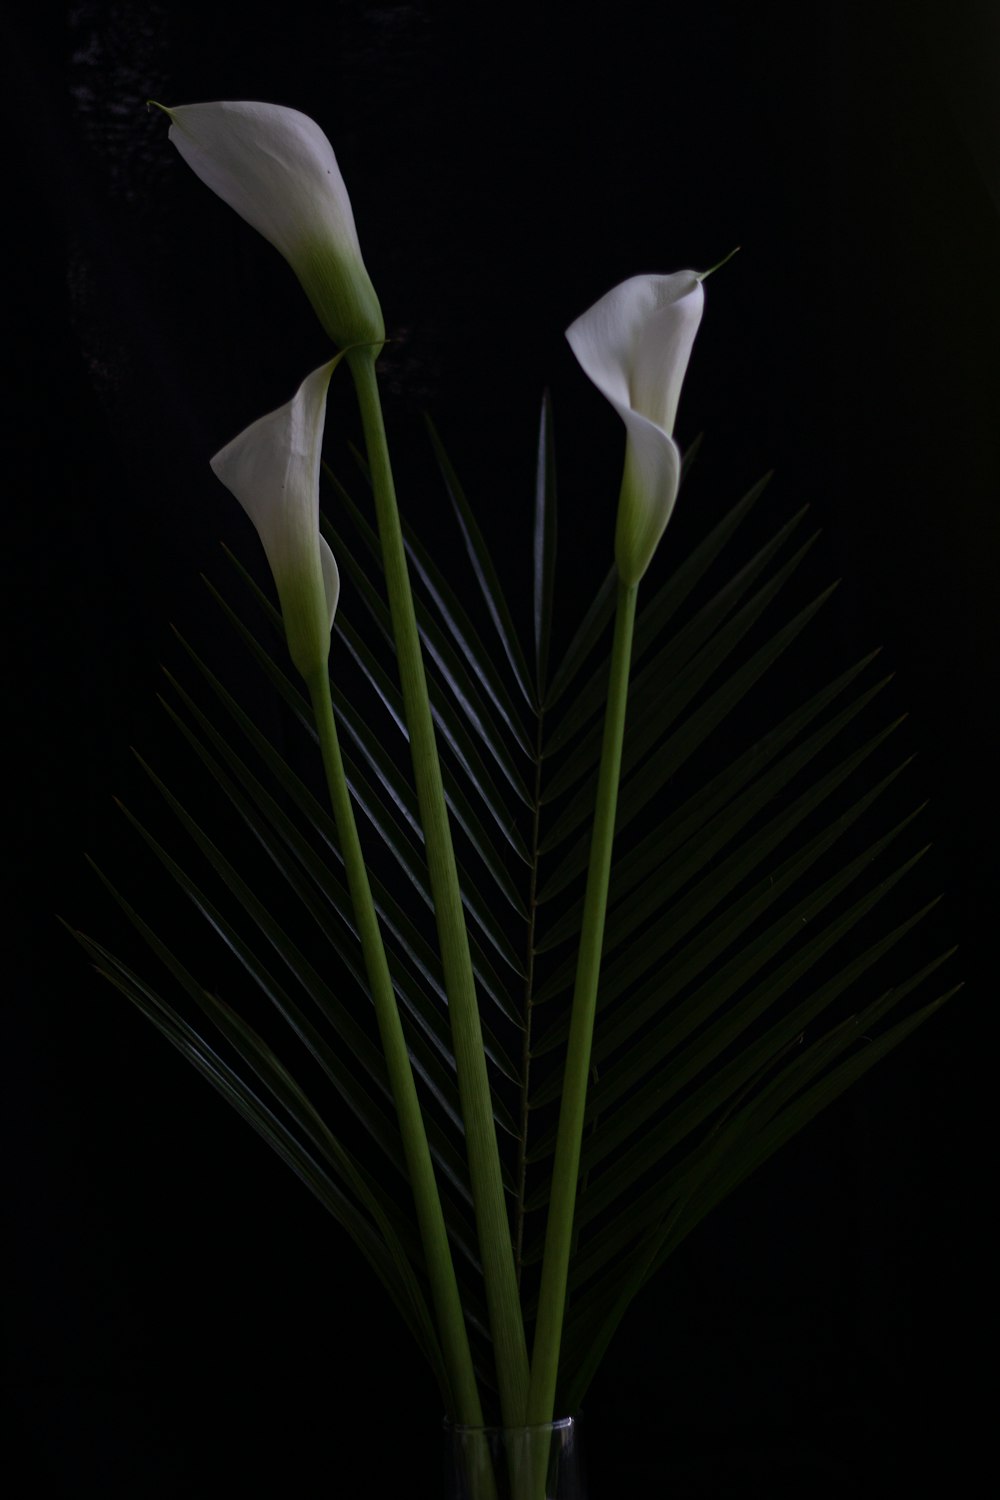 three white flowers in a glass vase on a black background